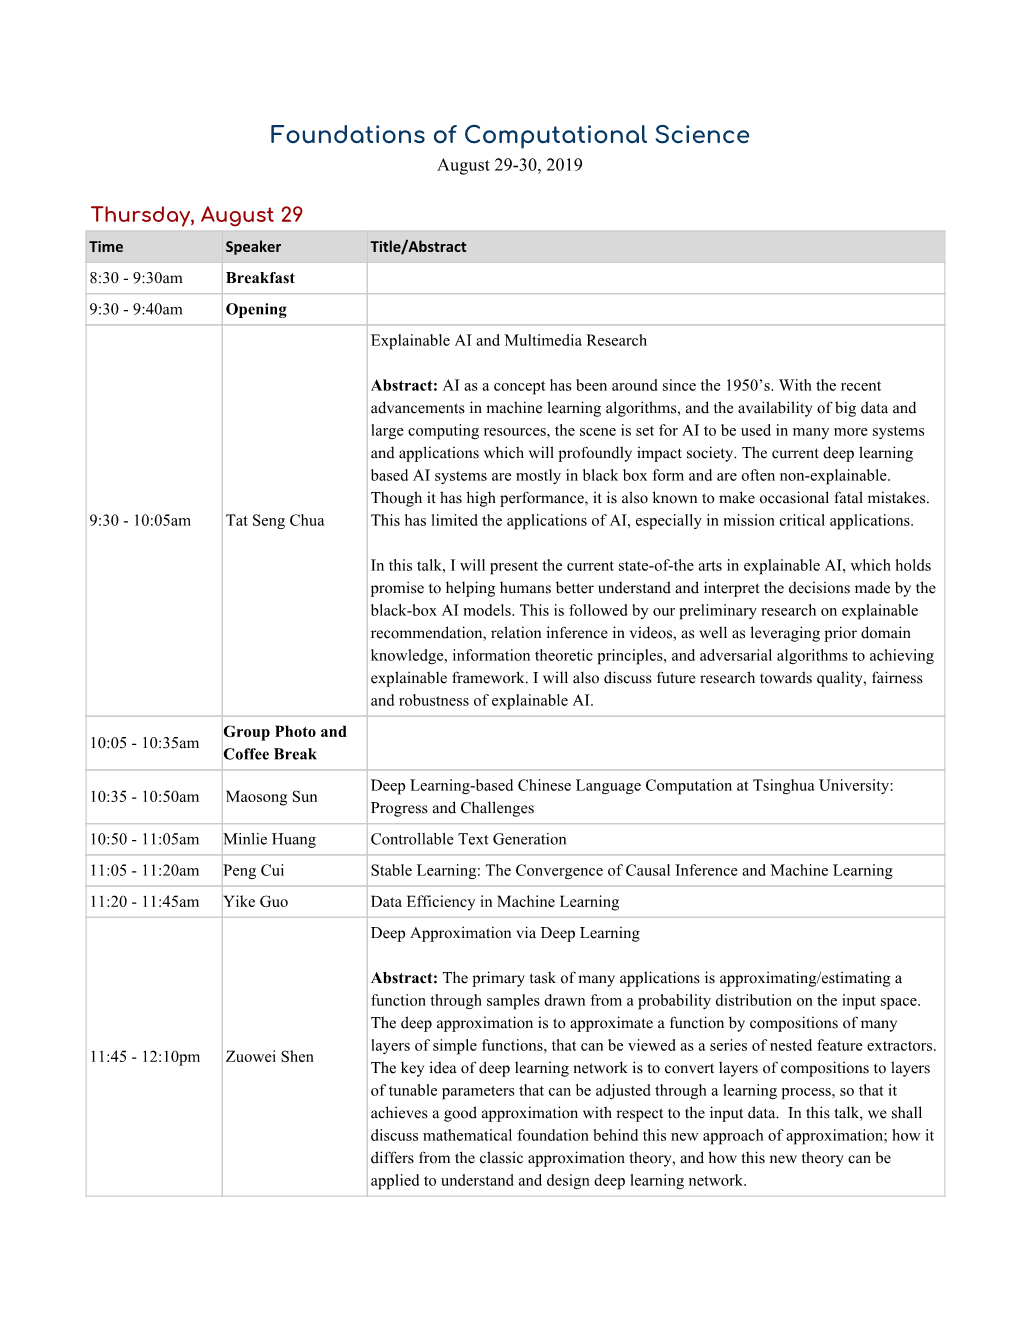 Foundations of Computational Science August 29-30, 2019